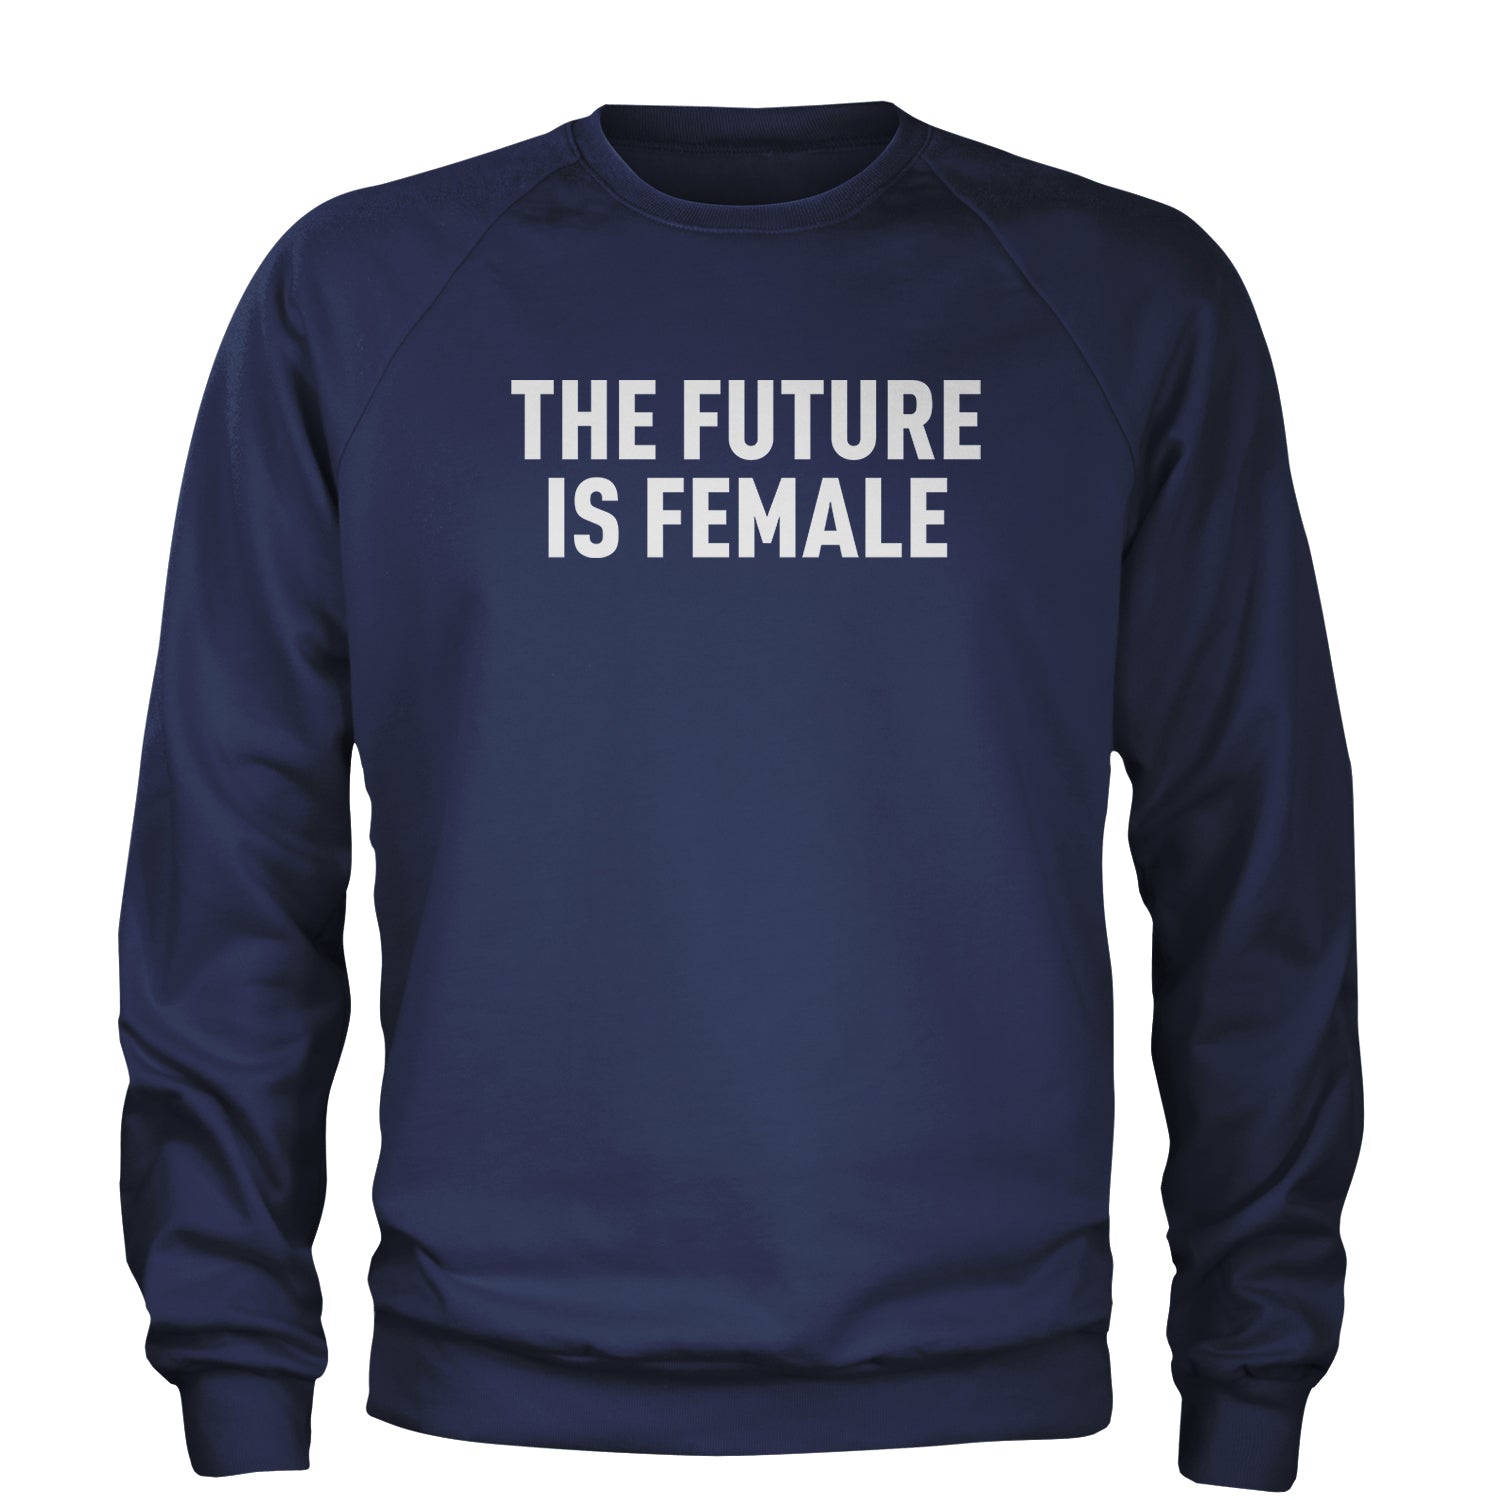 The Future Is Female Feminism Adult Crewneck Sweatshirt female, feminism, feminist, femme, future, is, liberation, suffrage, the by Expression Tees